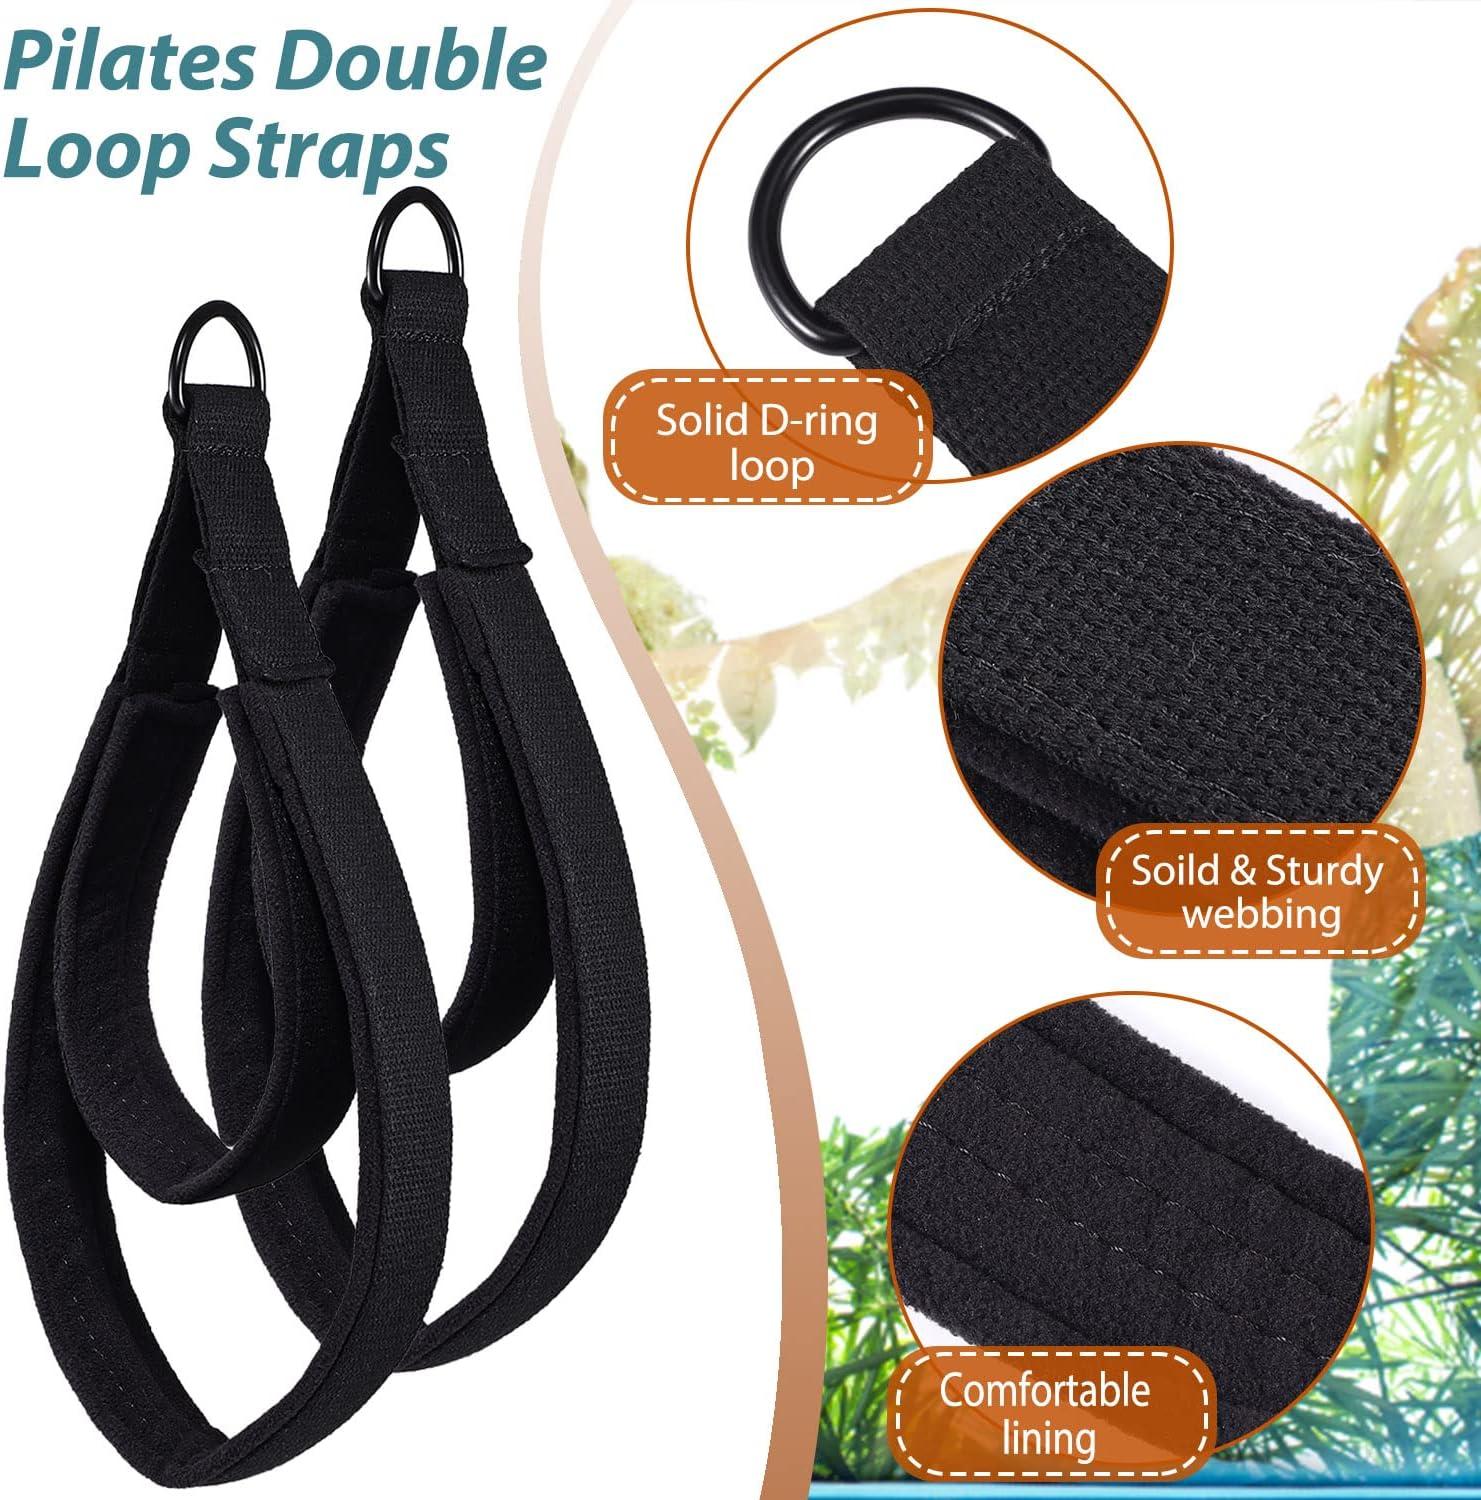 TOBWOLF 2PCS Pilates Straps, Pilates Double Loop Straps for Reformer,  Fitness D-Ring Straps Double Loops Padded, Pilates Equipment D-Ring Exercise  Straps Yoga Exercise Accessories for Home Gym Workout Black